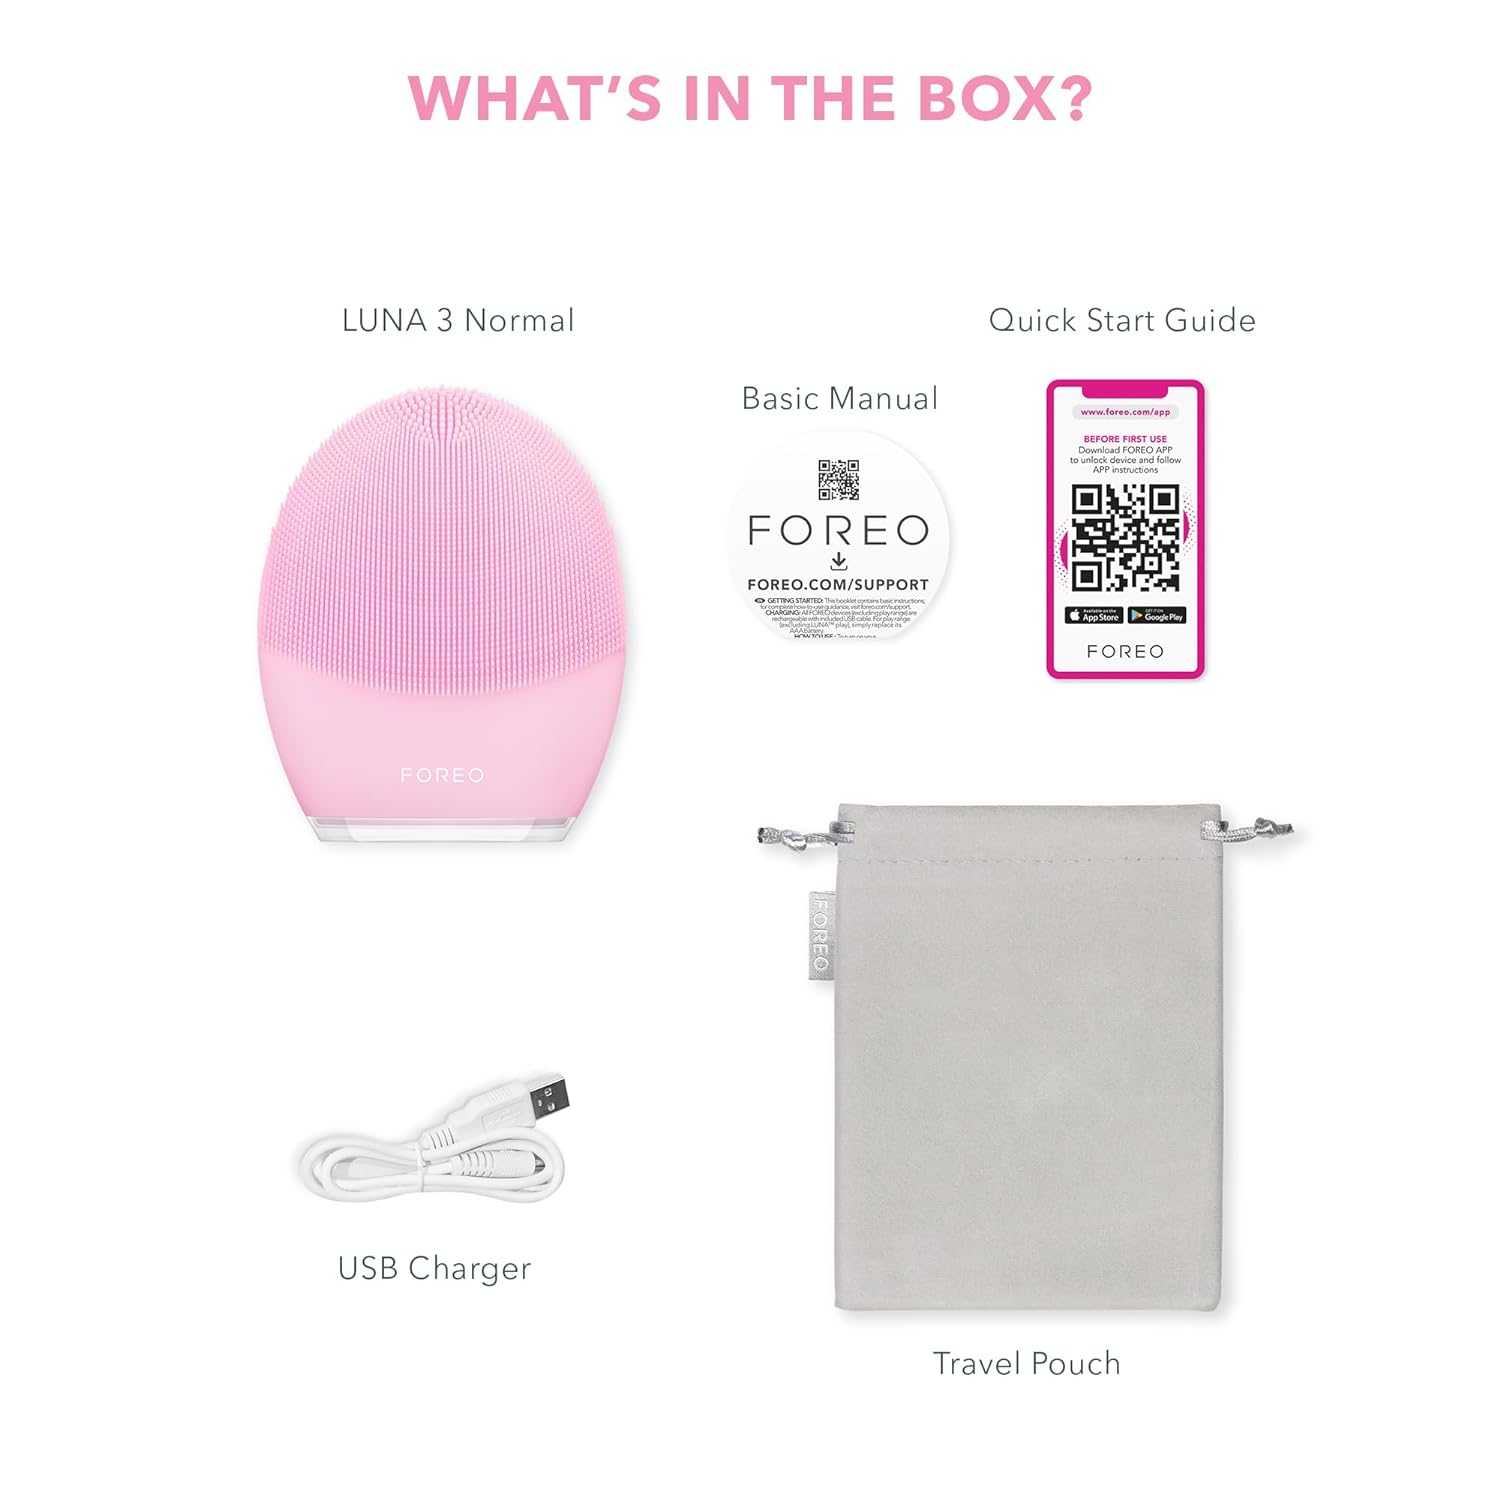 FOREO Sweden LUNA 3 Advanced Facial Cleansing Brush & Anti-Aging Massager for Normal Skin